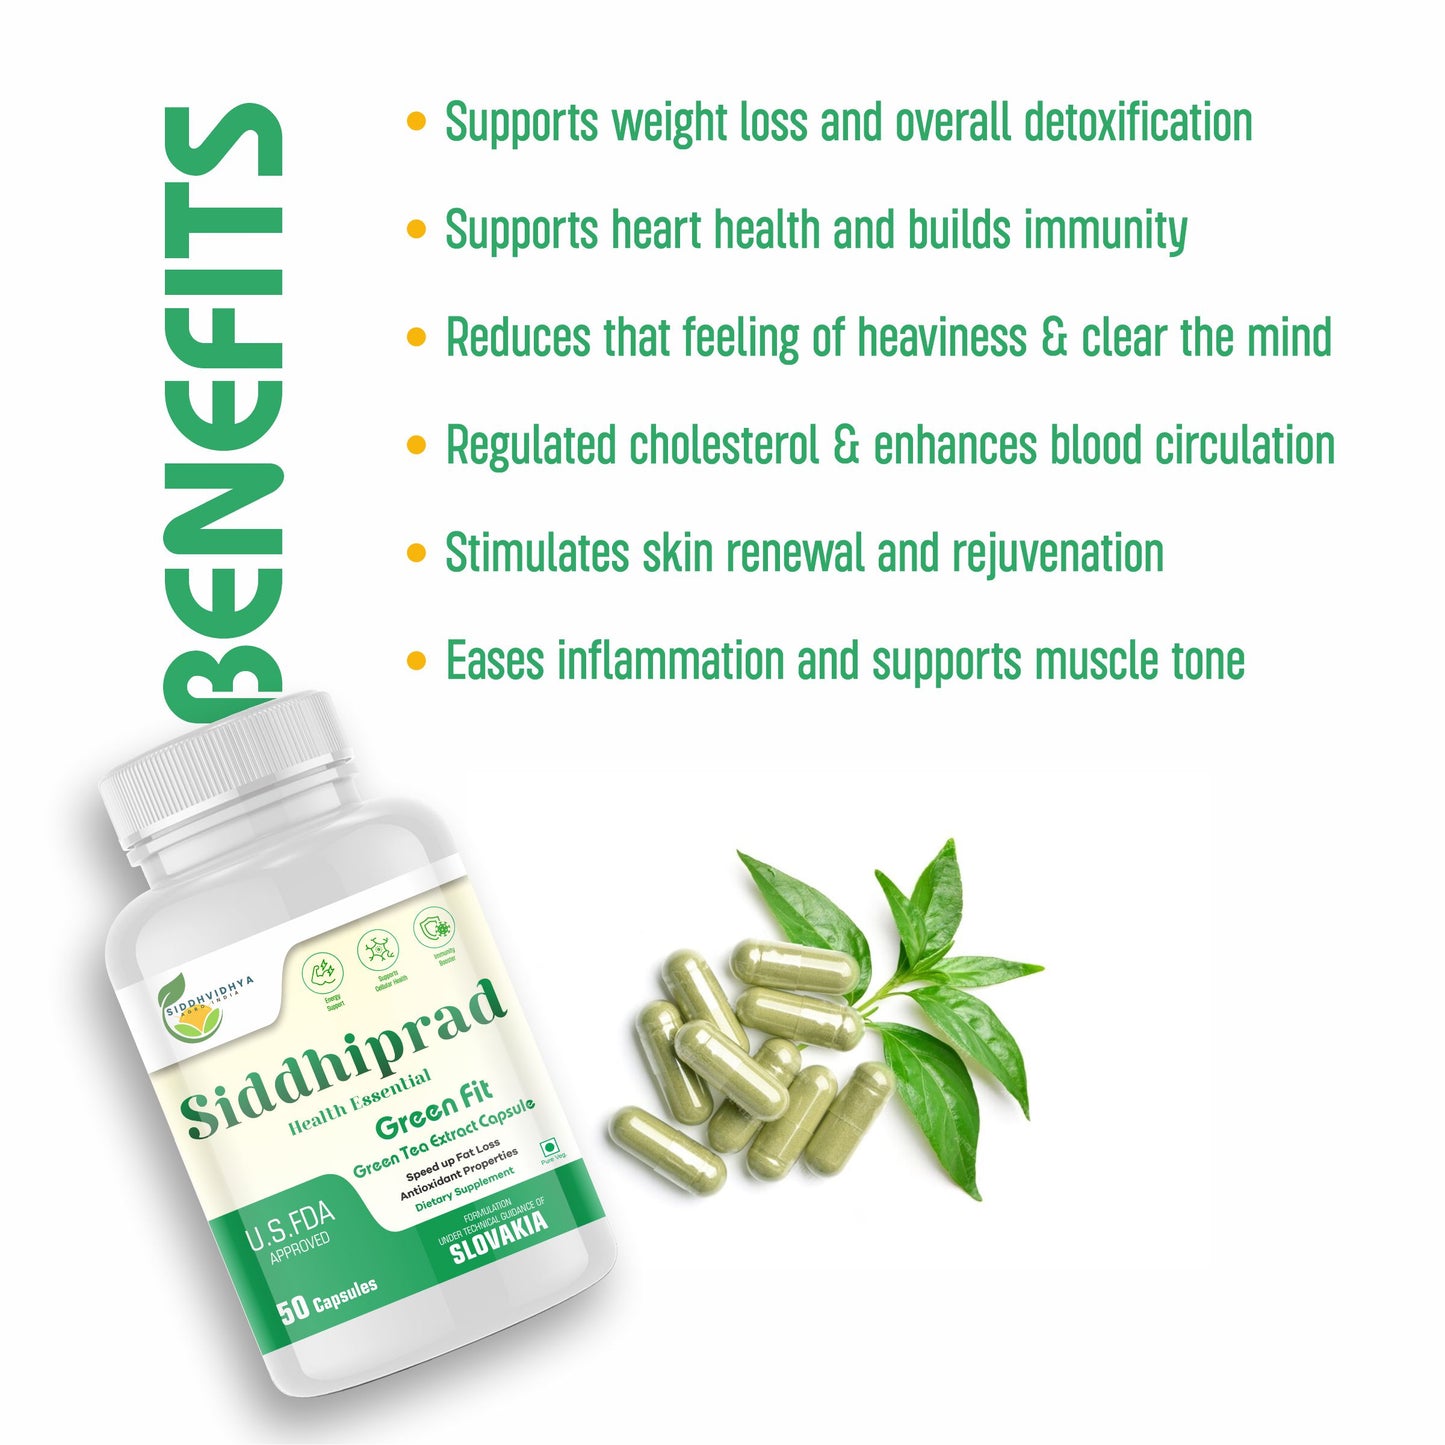 Green Tea Extract for Weight Loss & Antioxidant Metabolism Booster Skin Renewal - (60 Capsules)